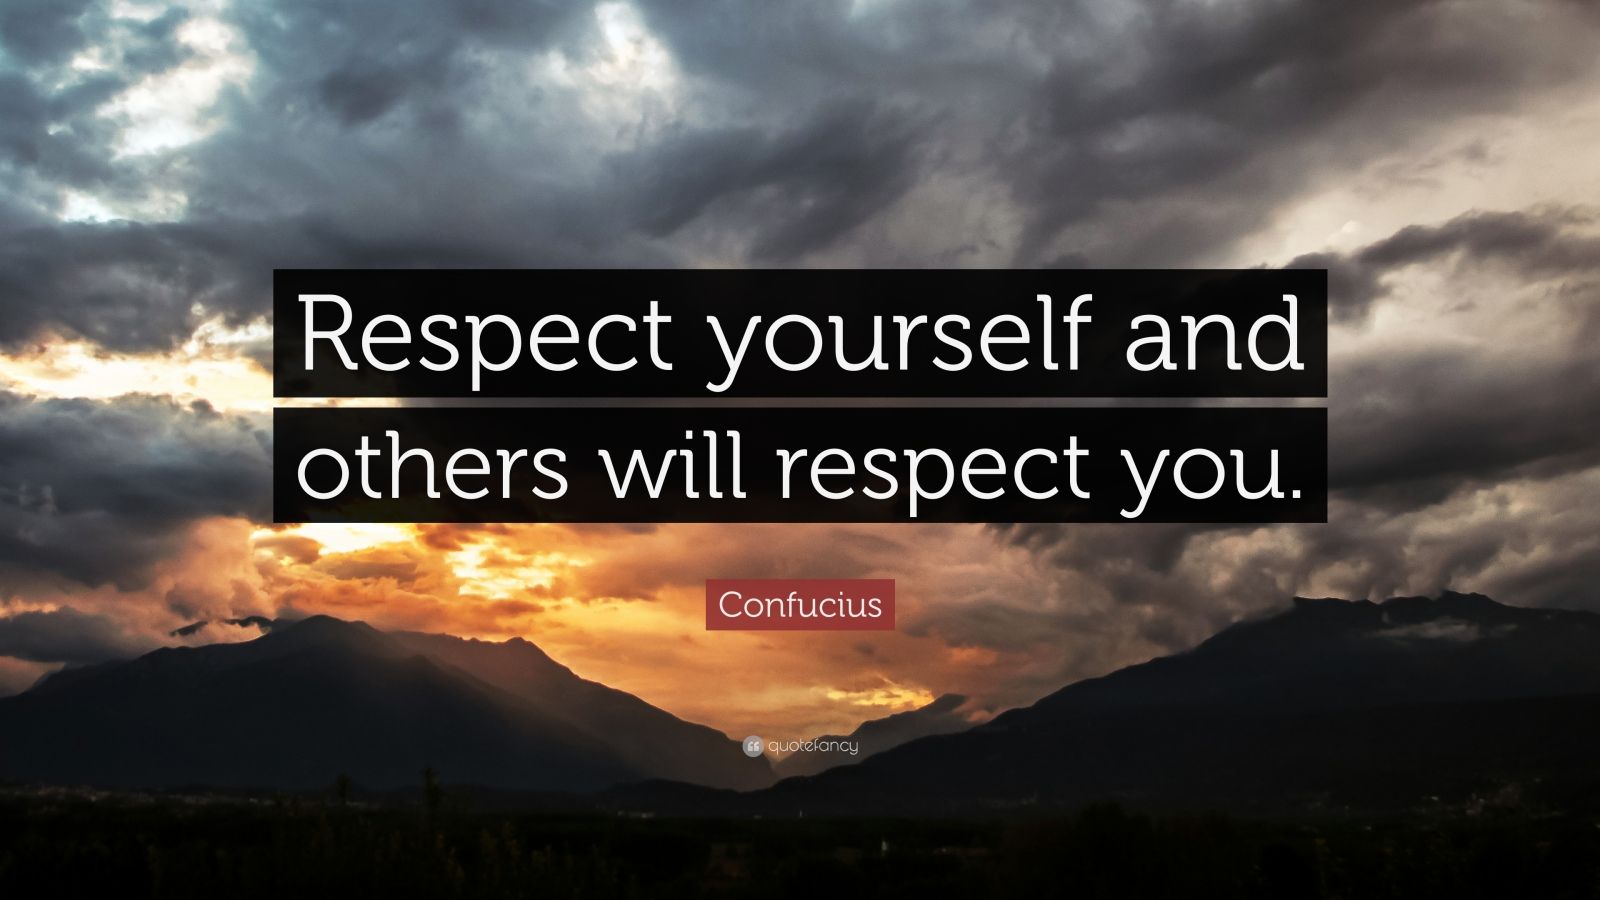 Confucius Quote: "Respect yourself and others will respect you." (20 wallpapers) - Quotefancy